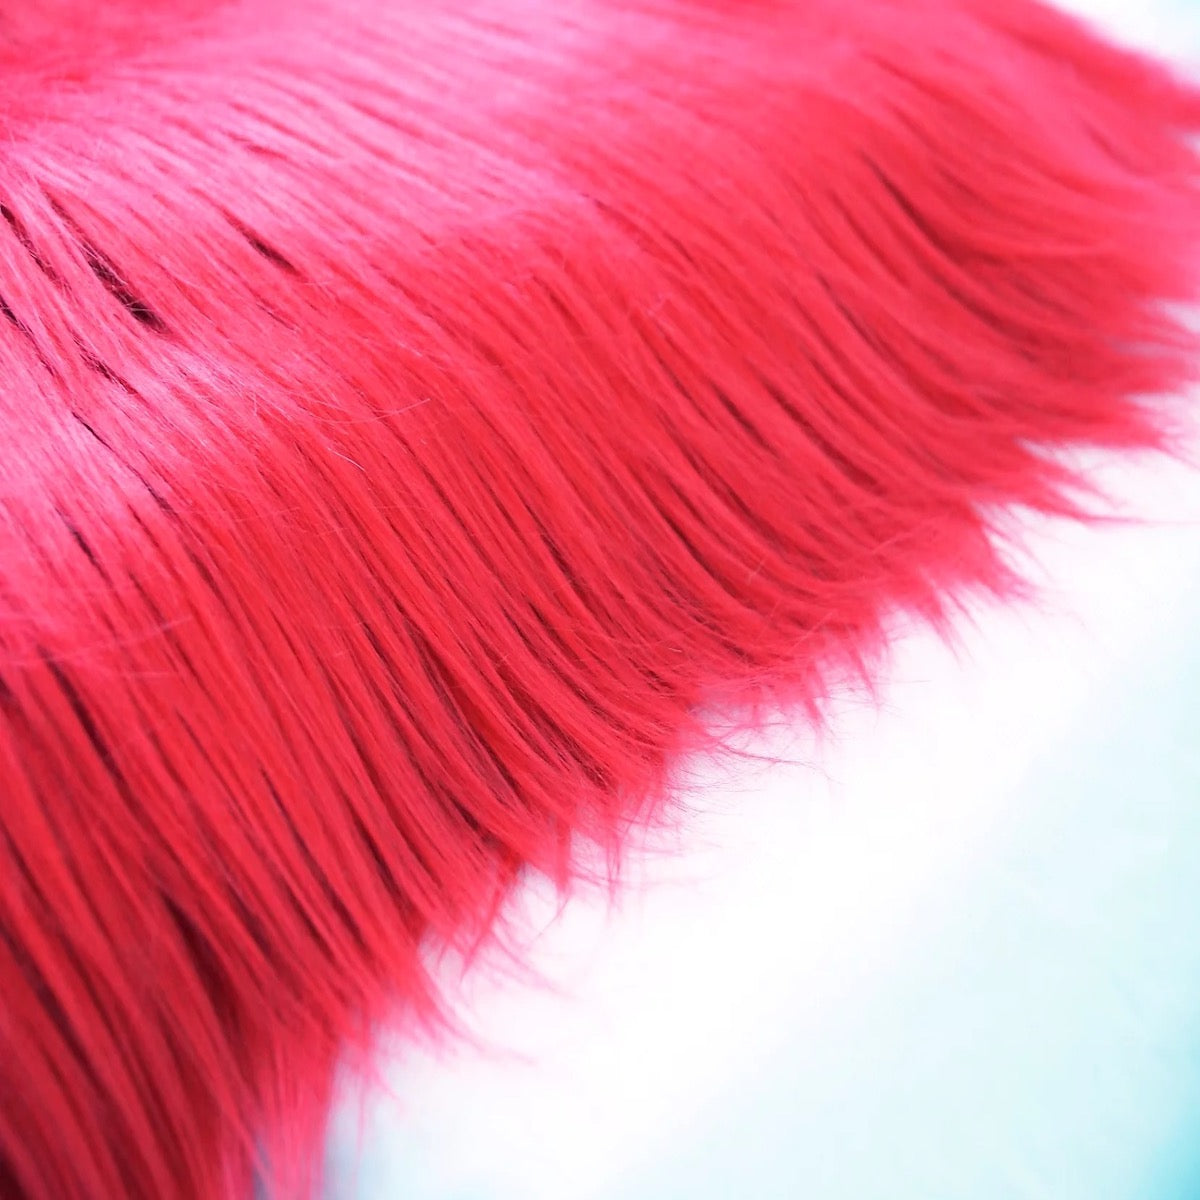 Low priced fake fur fabric by the meter, long hair, bright red - YF360TT  R.Red 